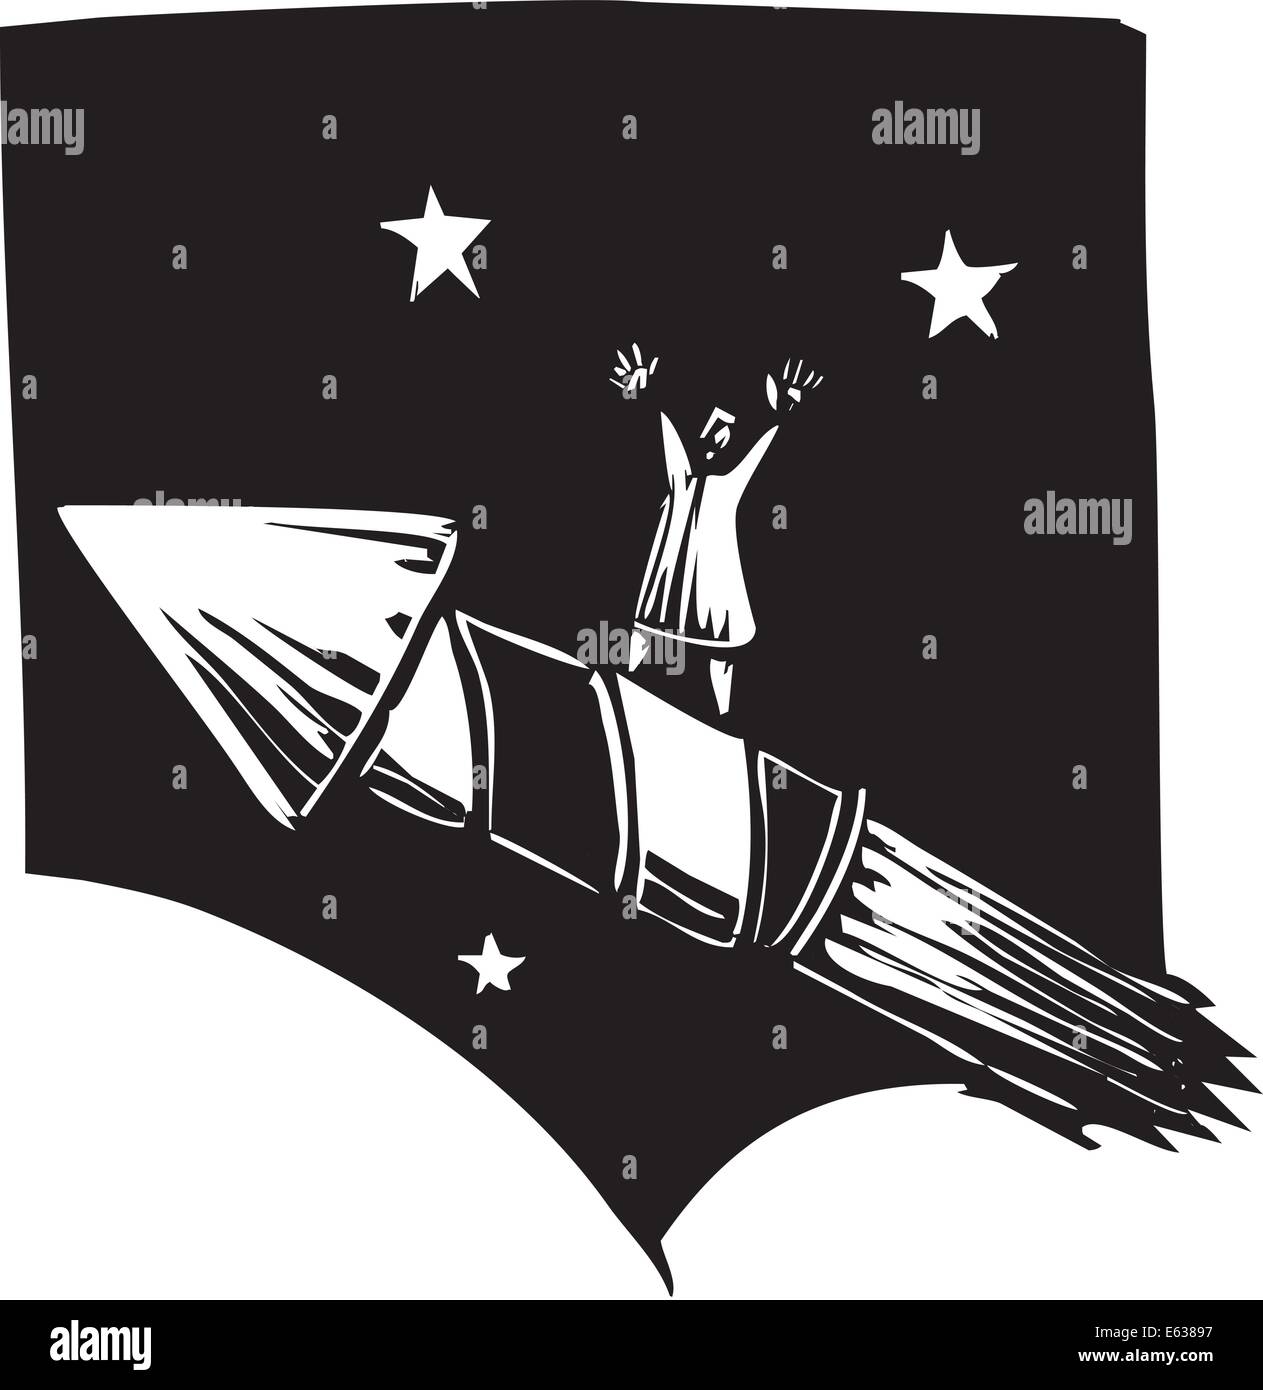 man riding a fireworks type rocket in the night sky Stock Vector